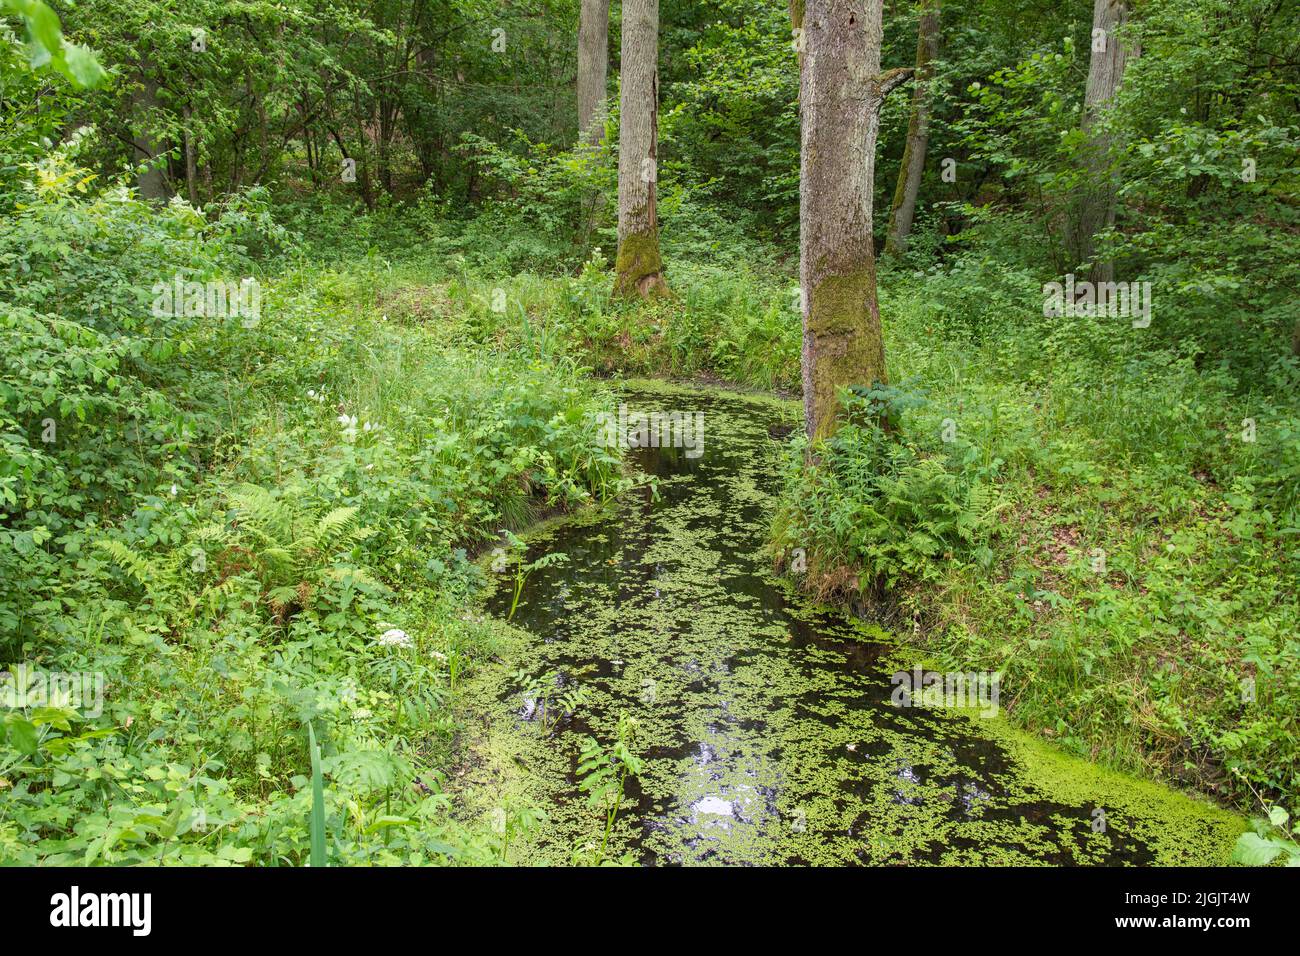 A stream overgrown with duckweed and grass in a dense, inaccessible forest on a hot summer day. Stock Photo